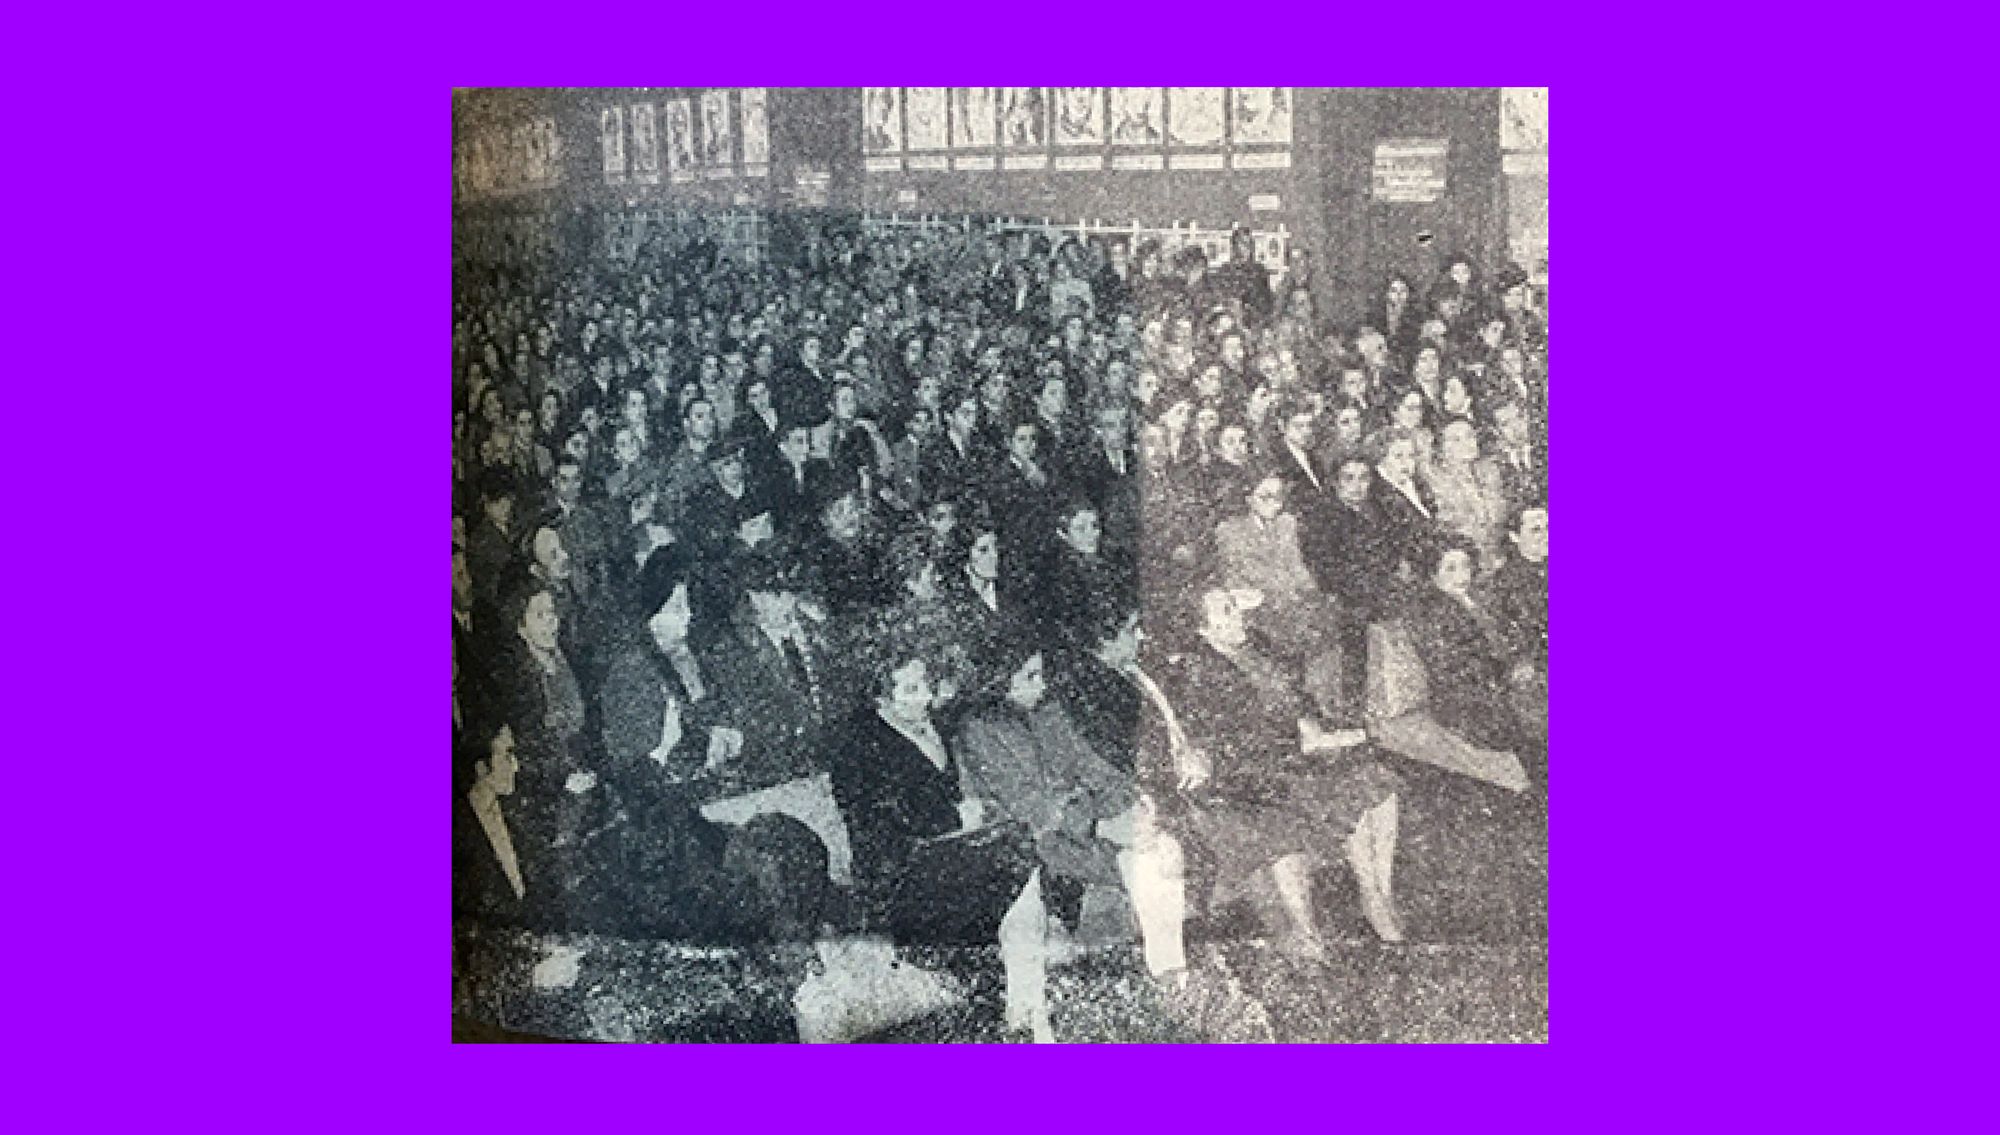 Detail of a page from Modas e Bordados showing the attendance to one of the events organized by the Council as part of the exhibition Books Written by Women